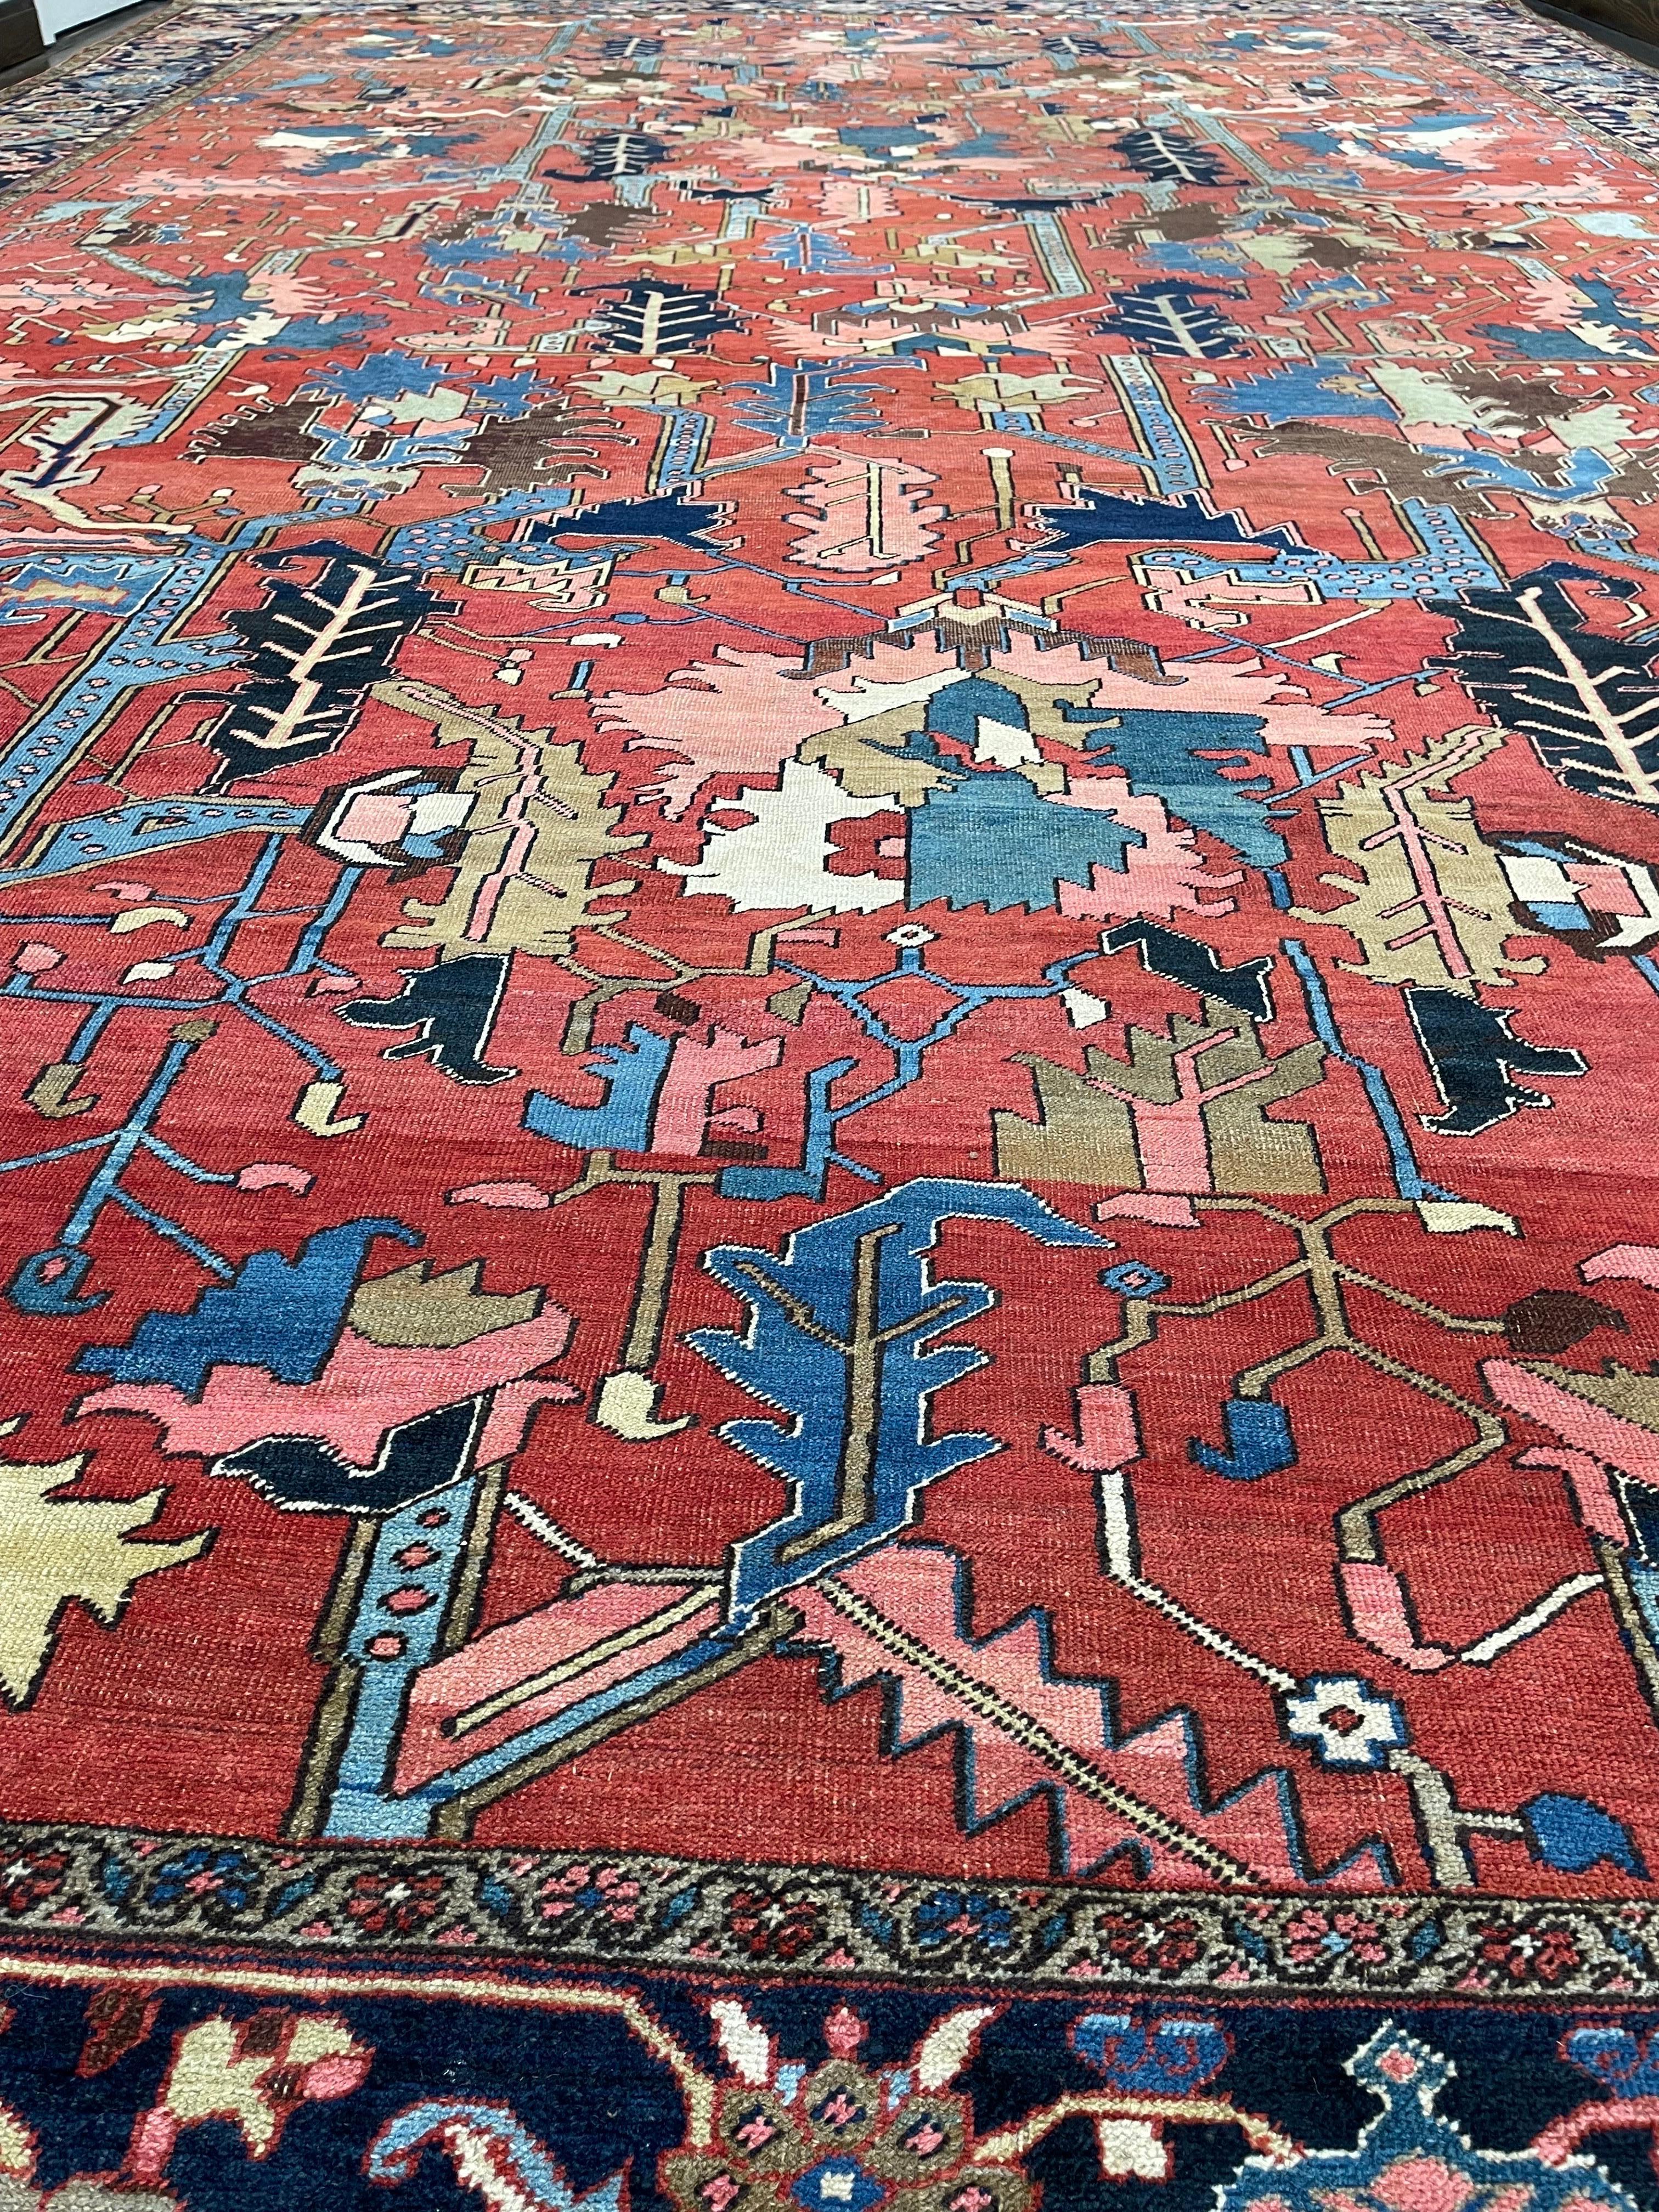 One can not pretend to describe the true nature of the iconography of this breathtaking carpet. The aim of this writing is rather to further the love of the art and the artists that created this masterpiece by simplifying the approach to it. 

